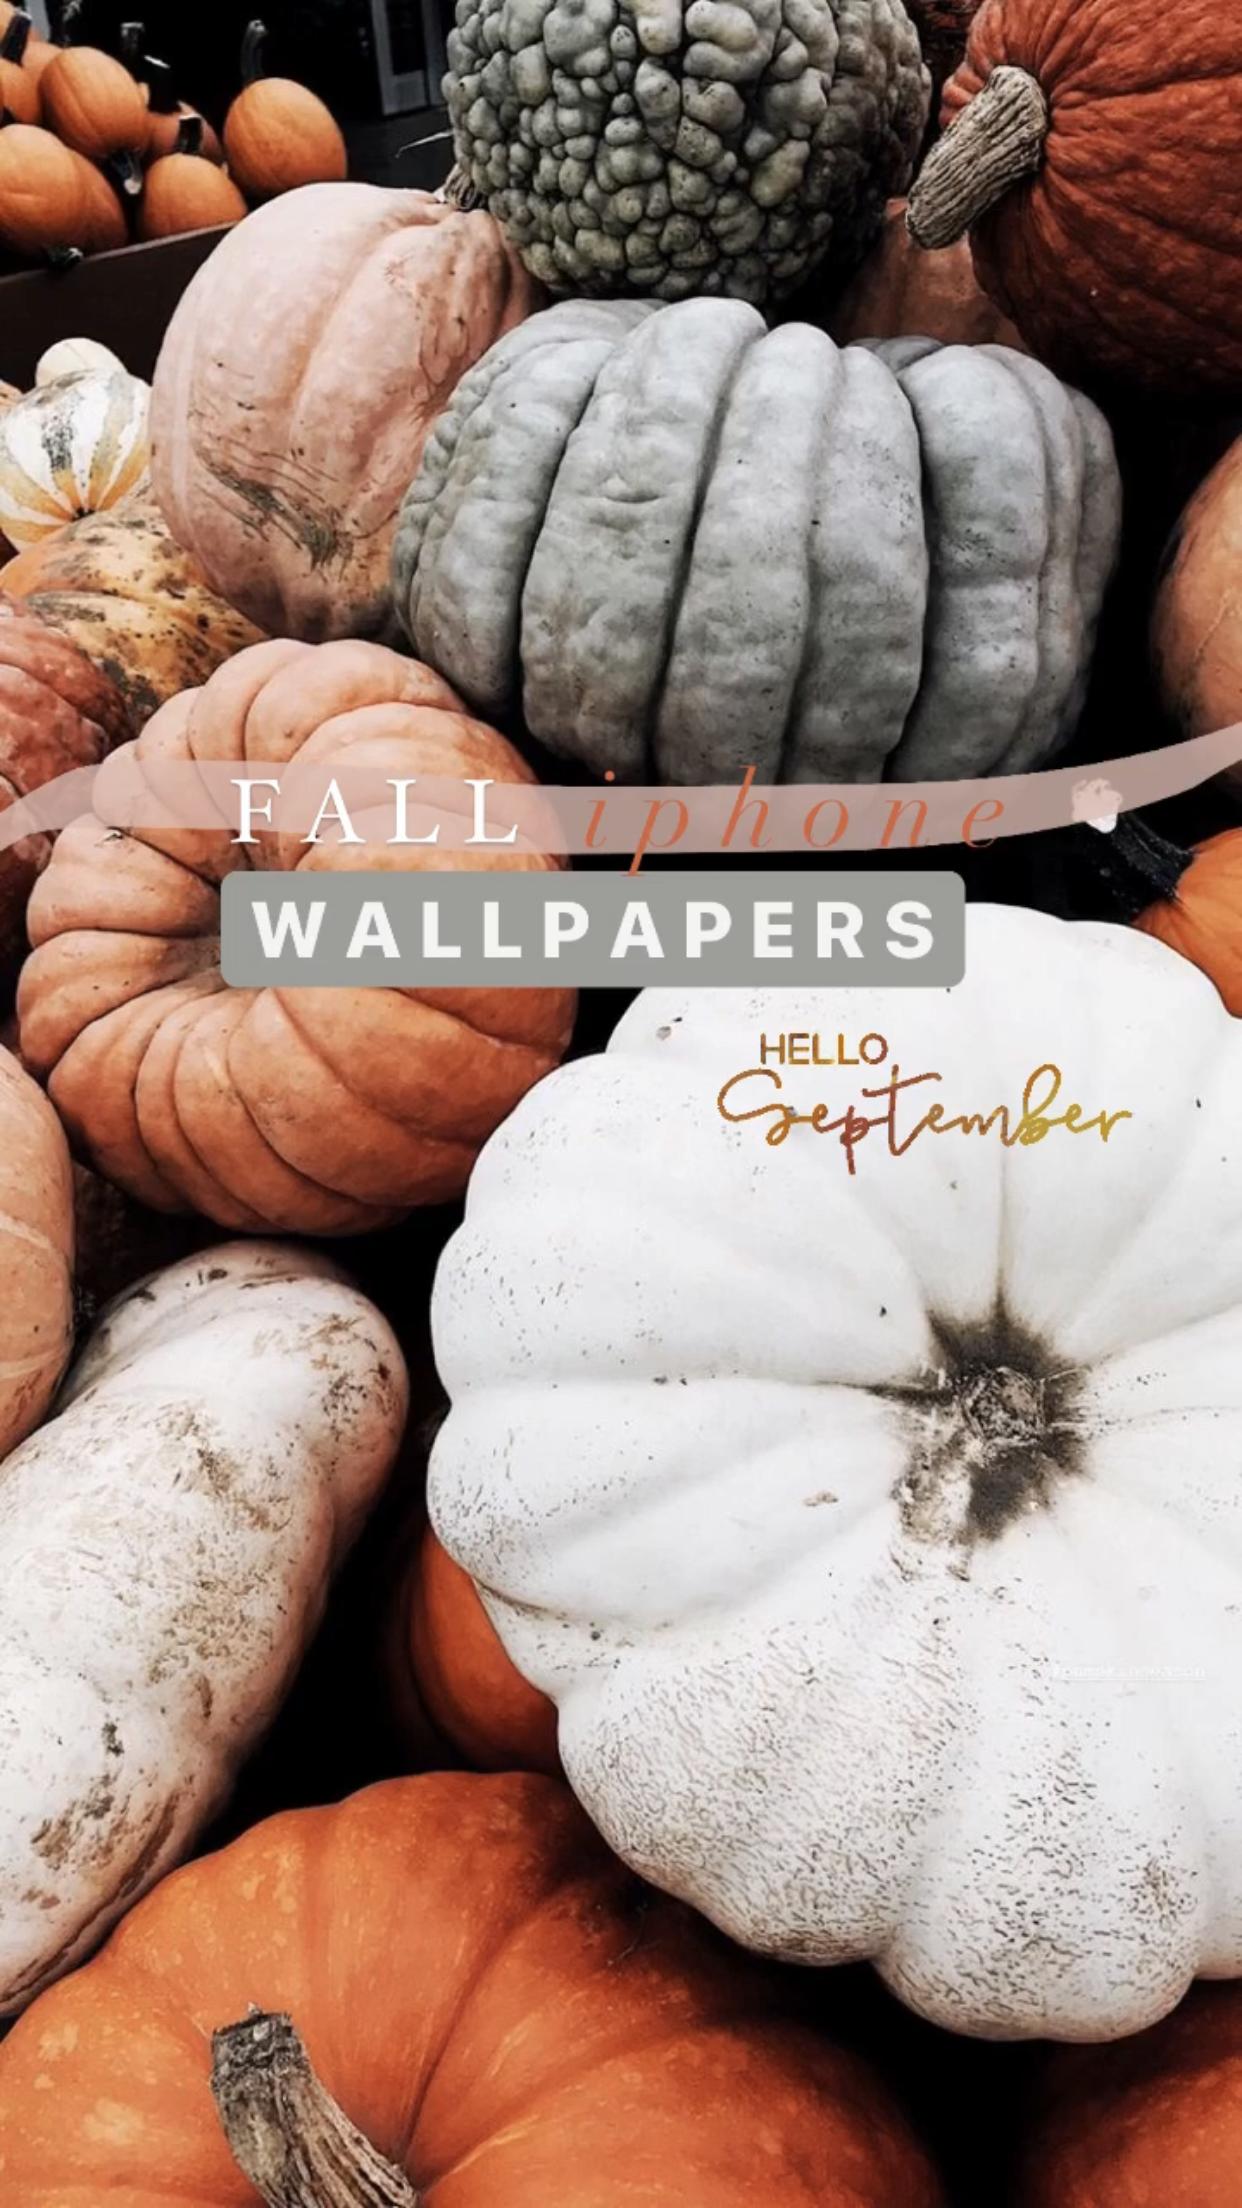 Fall in love with these fall phone wallpapers! Hello September! - September, pumpkin, fall, orange, fall iPhone, spooky